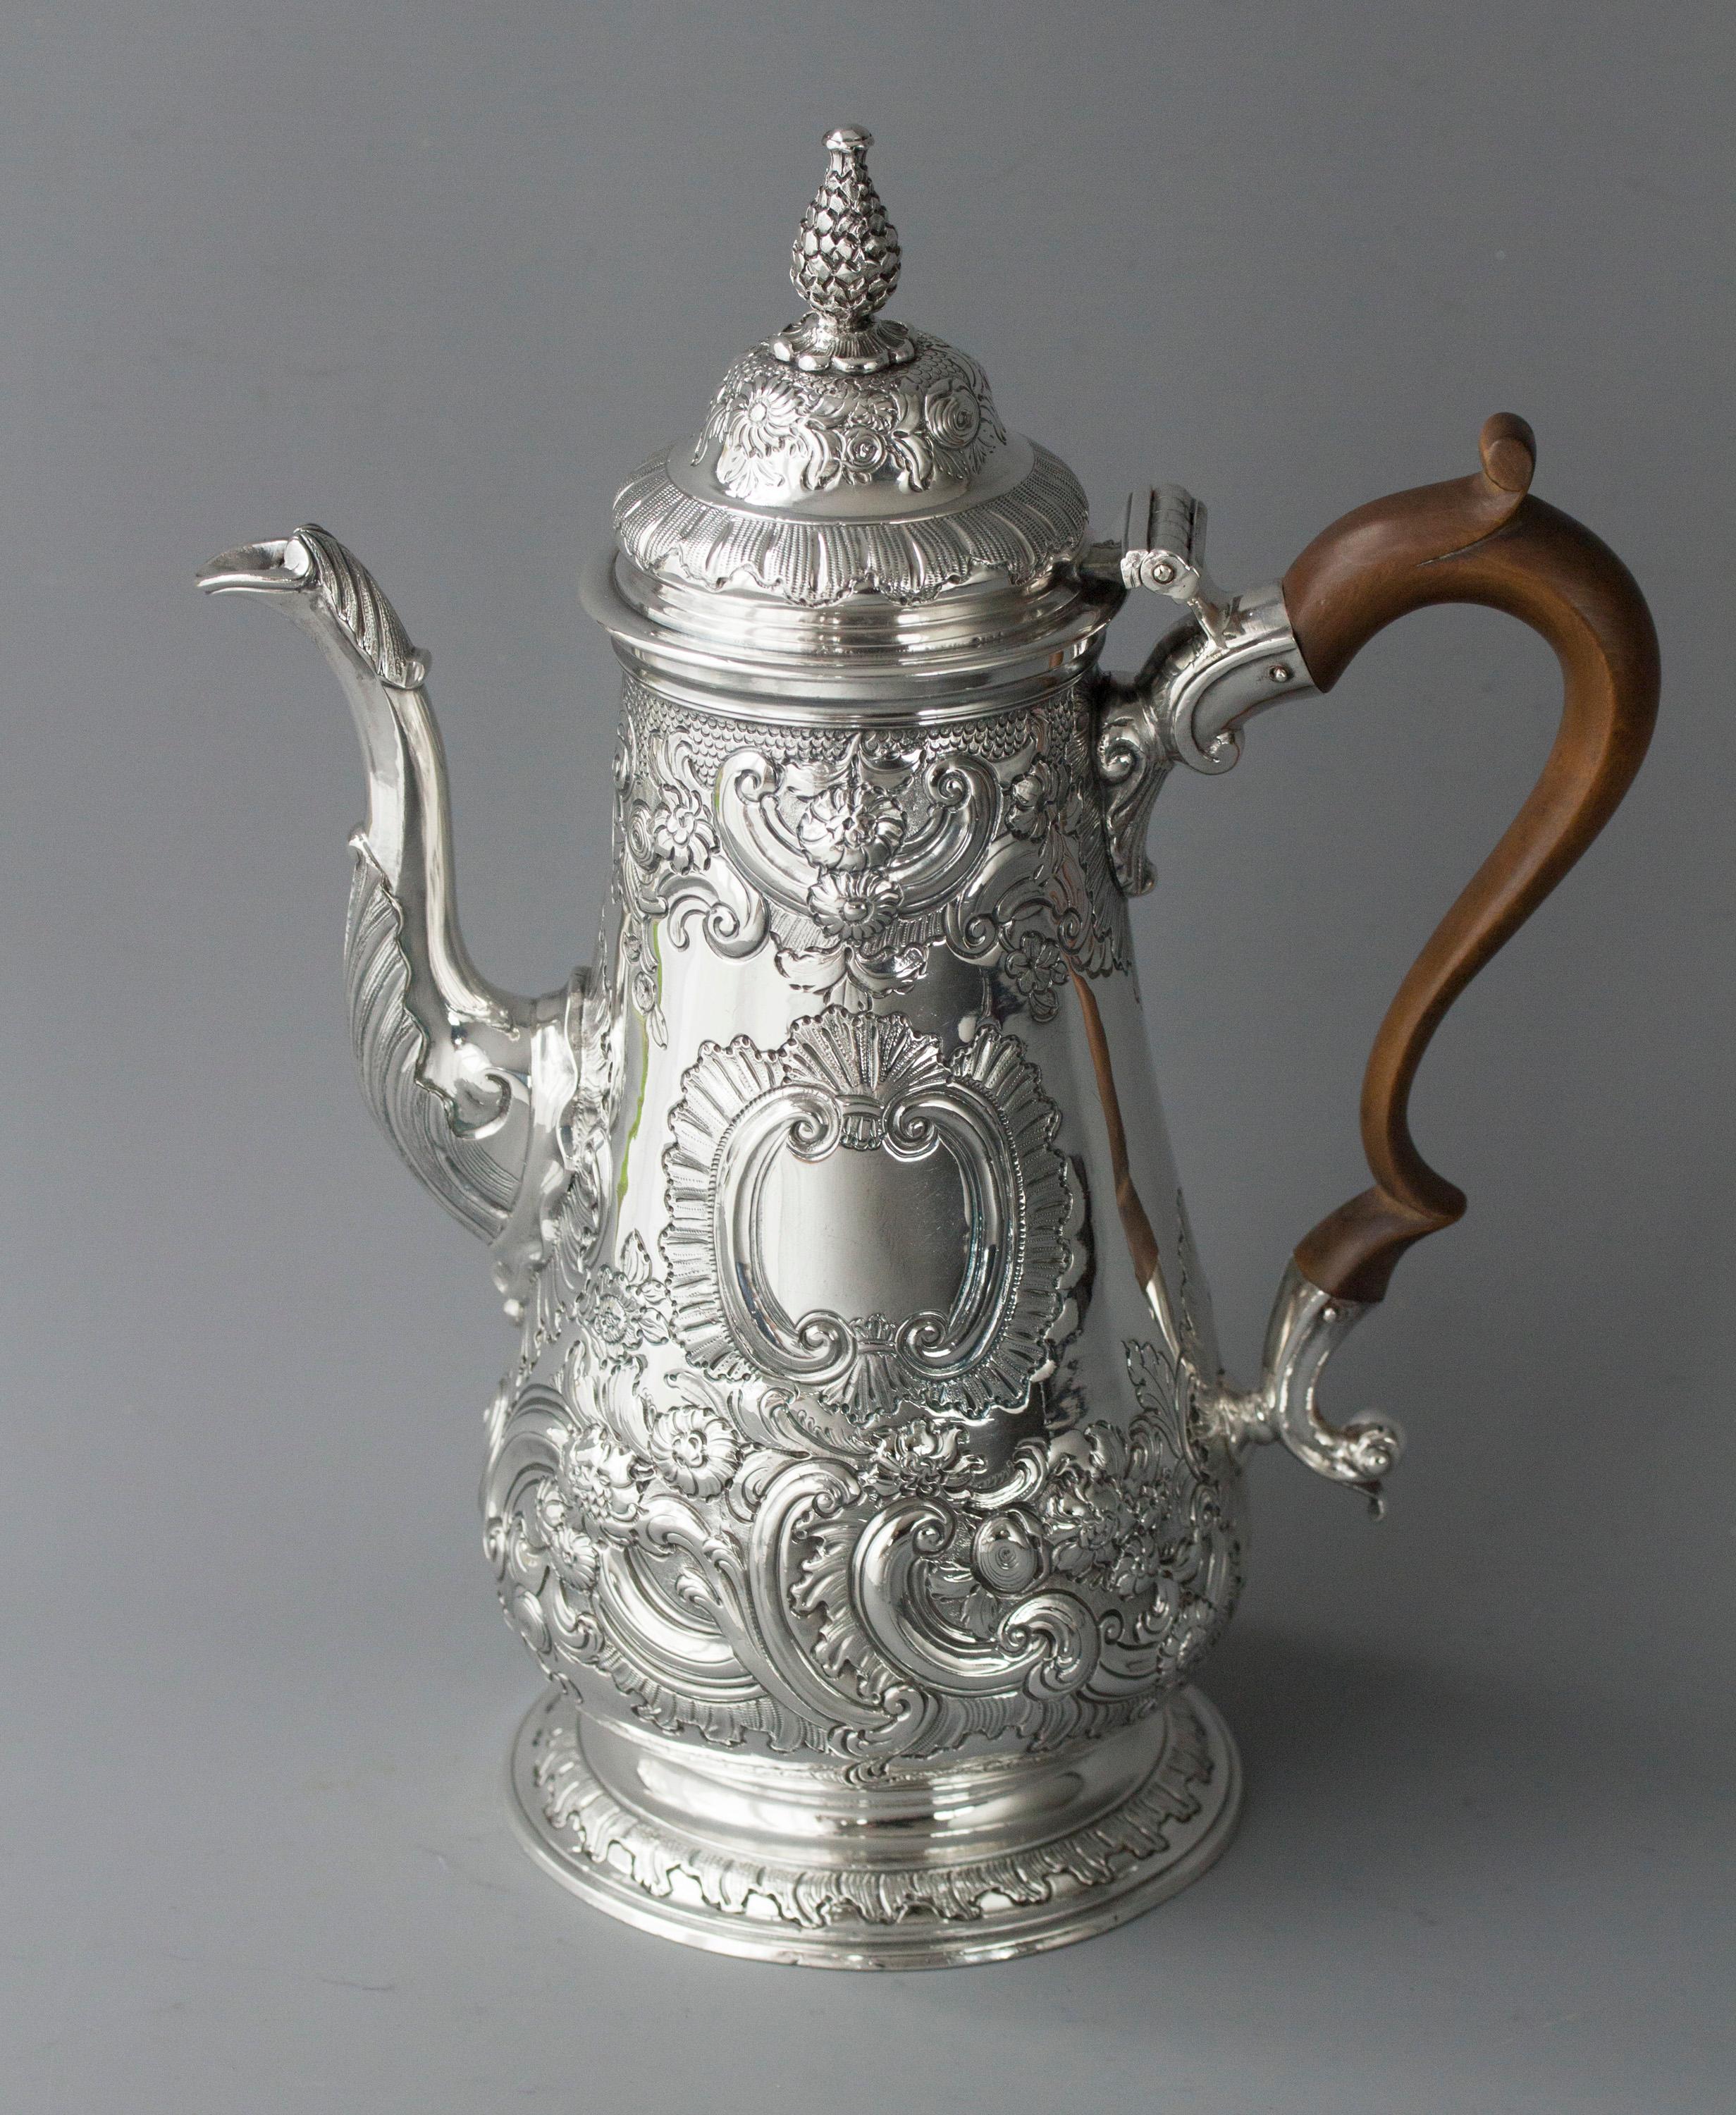 An impressive George II silver coffee pot of tapered baluster form, with a cast and applied spout, surmounted by a raised, domed lid with a cast pinecone finial. Original scroll fruitwood handle. All standing on a raised circular foot. The pot is